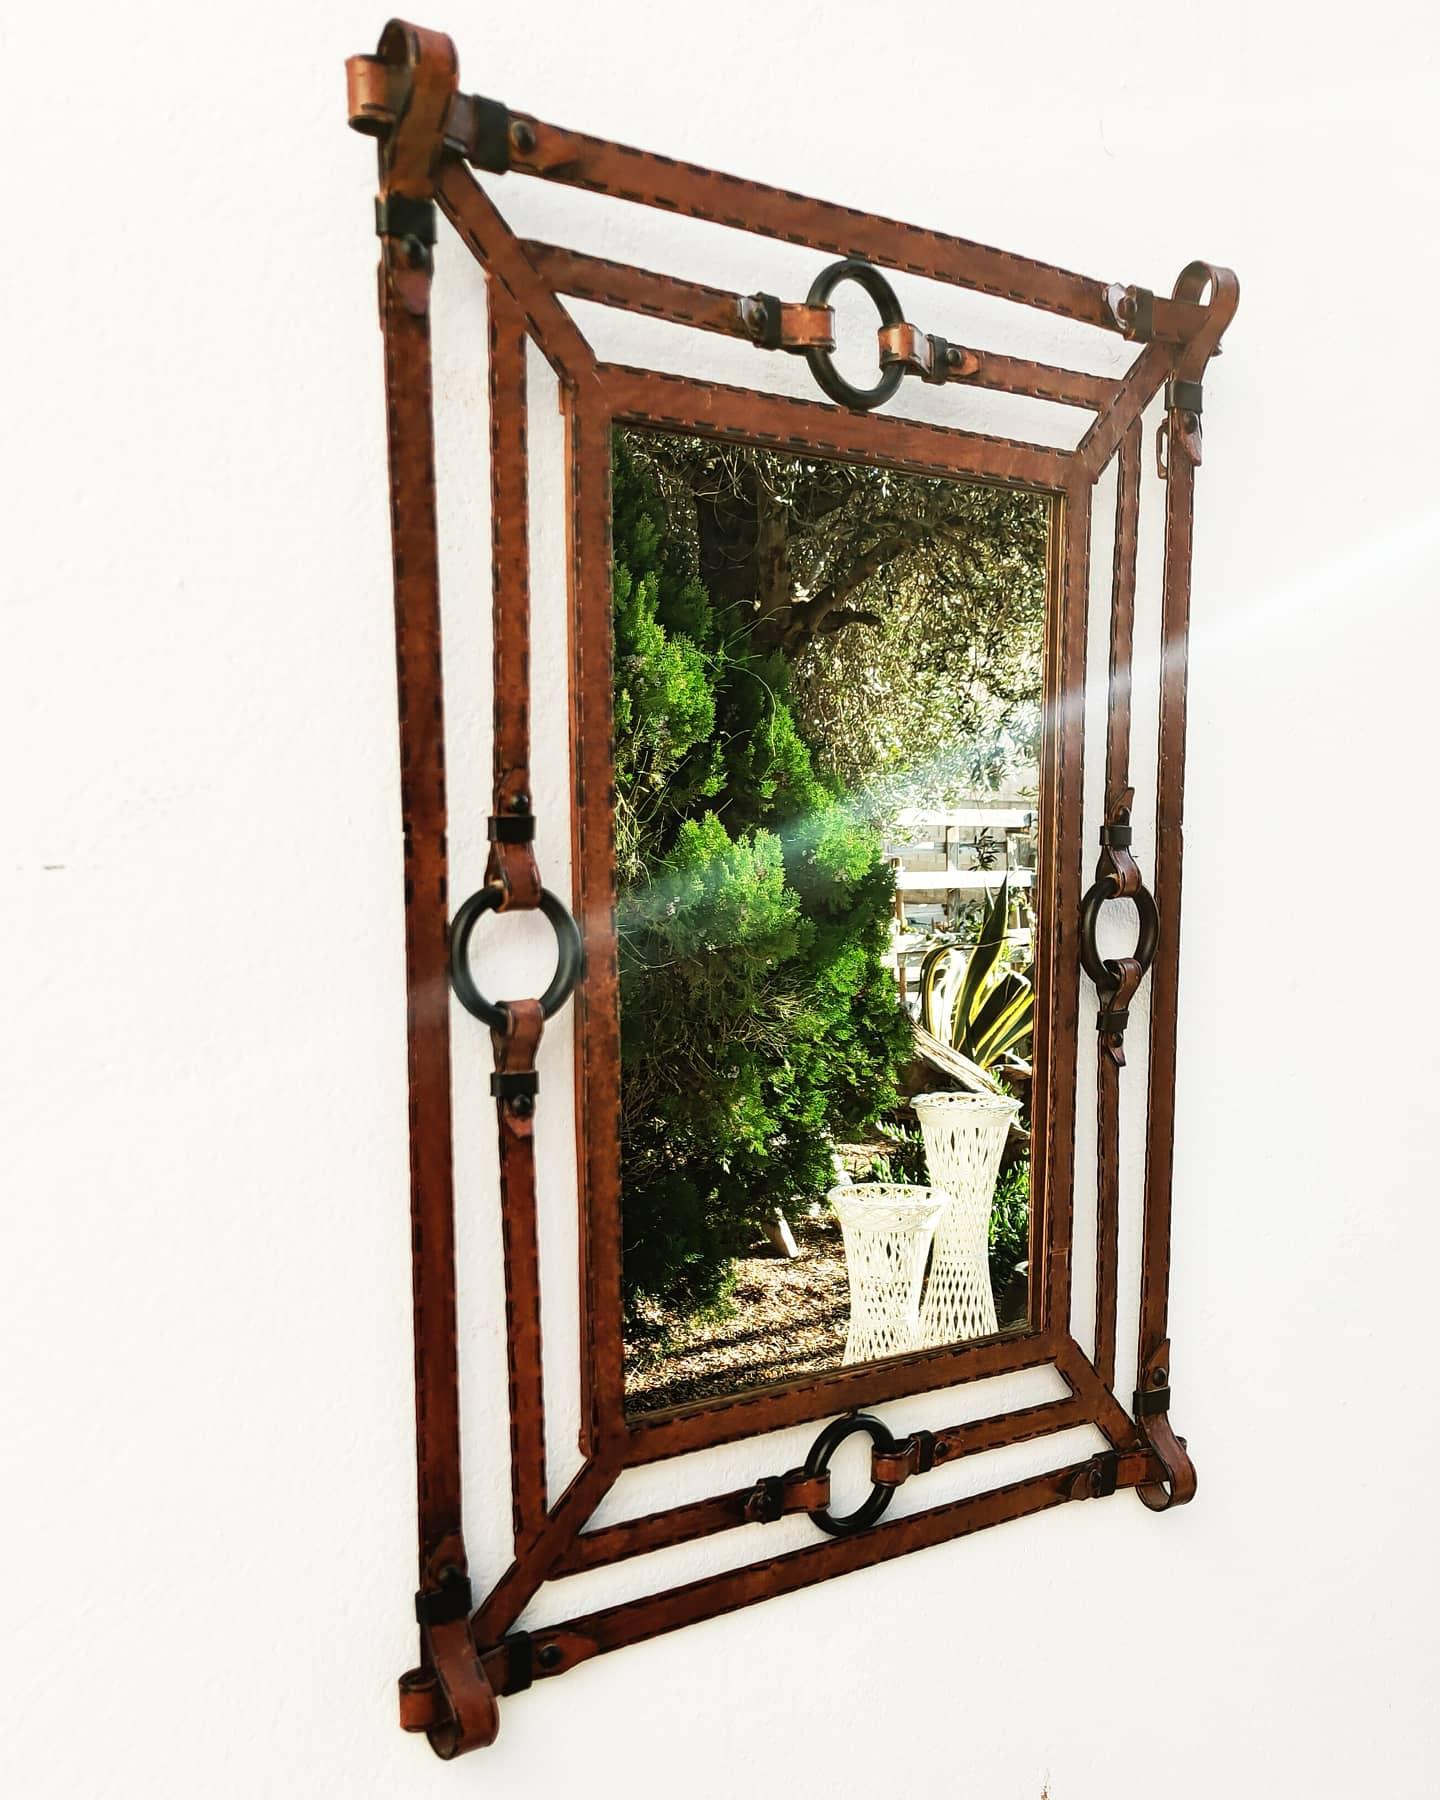 Large Iron mirror like Leather by Jean Pierre Ryckaert, manufactured in France in 1960s. Incredible work of the artist. 
Dimension of Mirror : (cm) 40 W x 60 H.
Dimension all: (cm) 69 W x 88 H x 6 D.